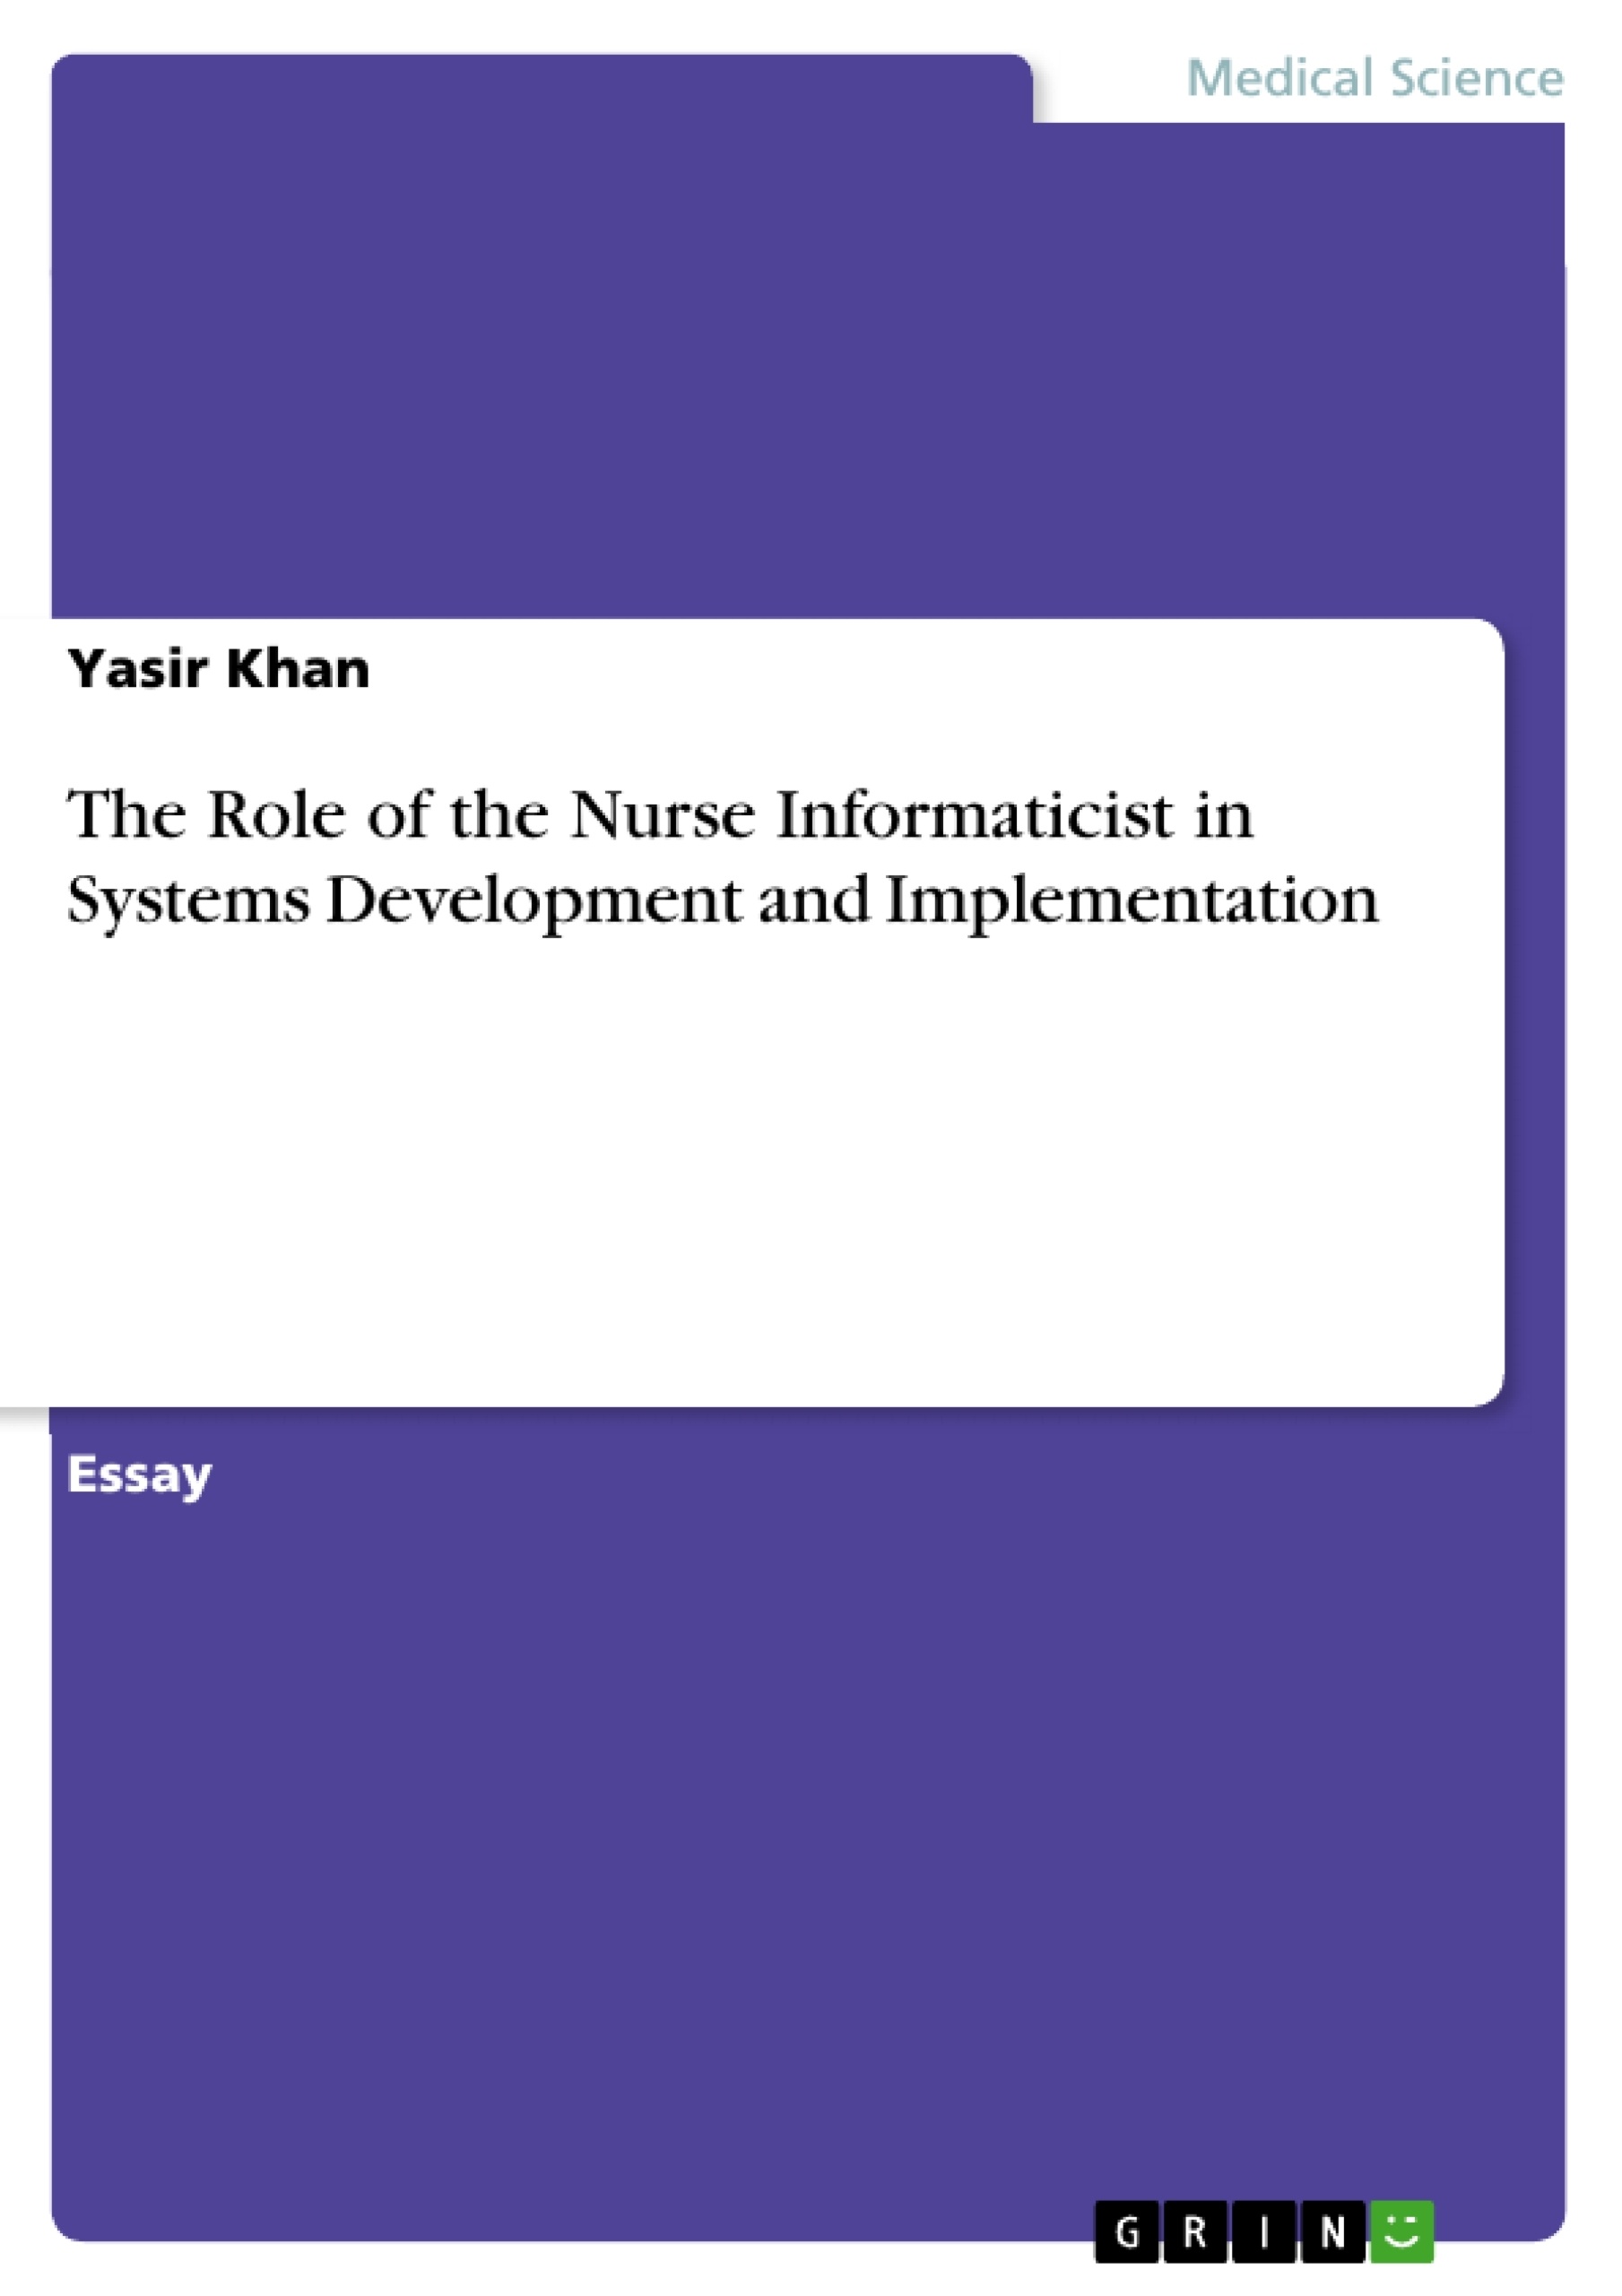 Title: The Role of the Nurse Informaticist in Systems Development and Implementation